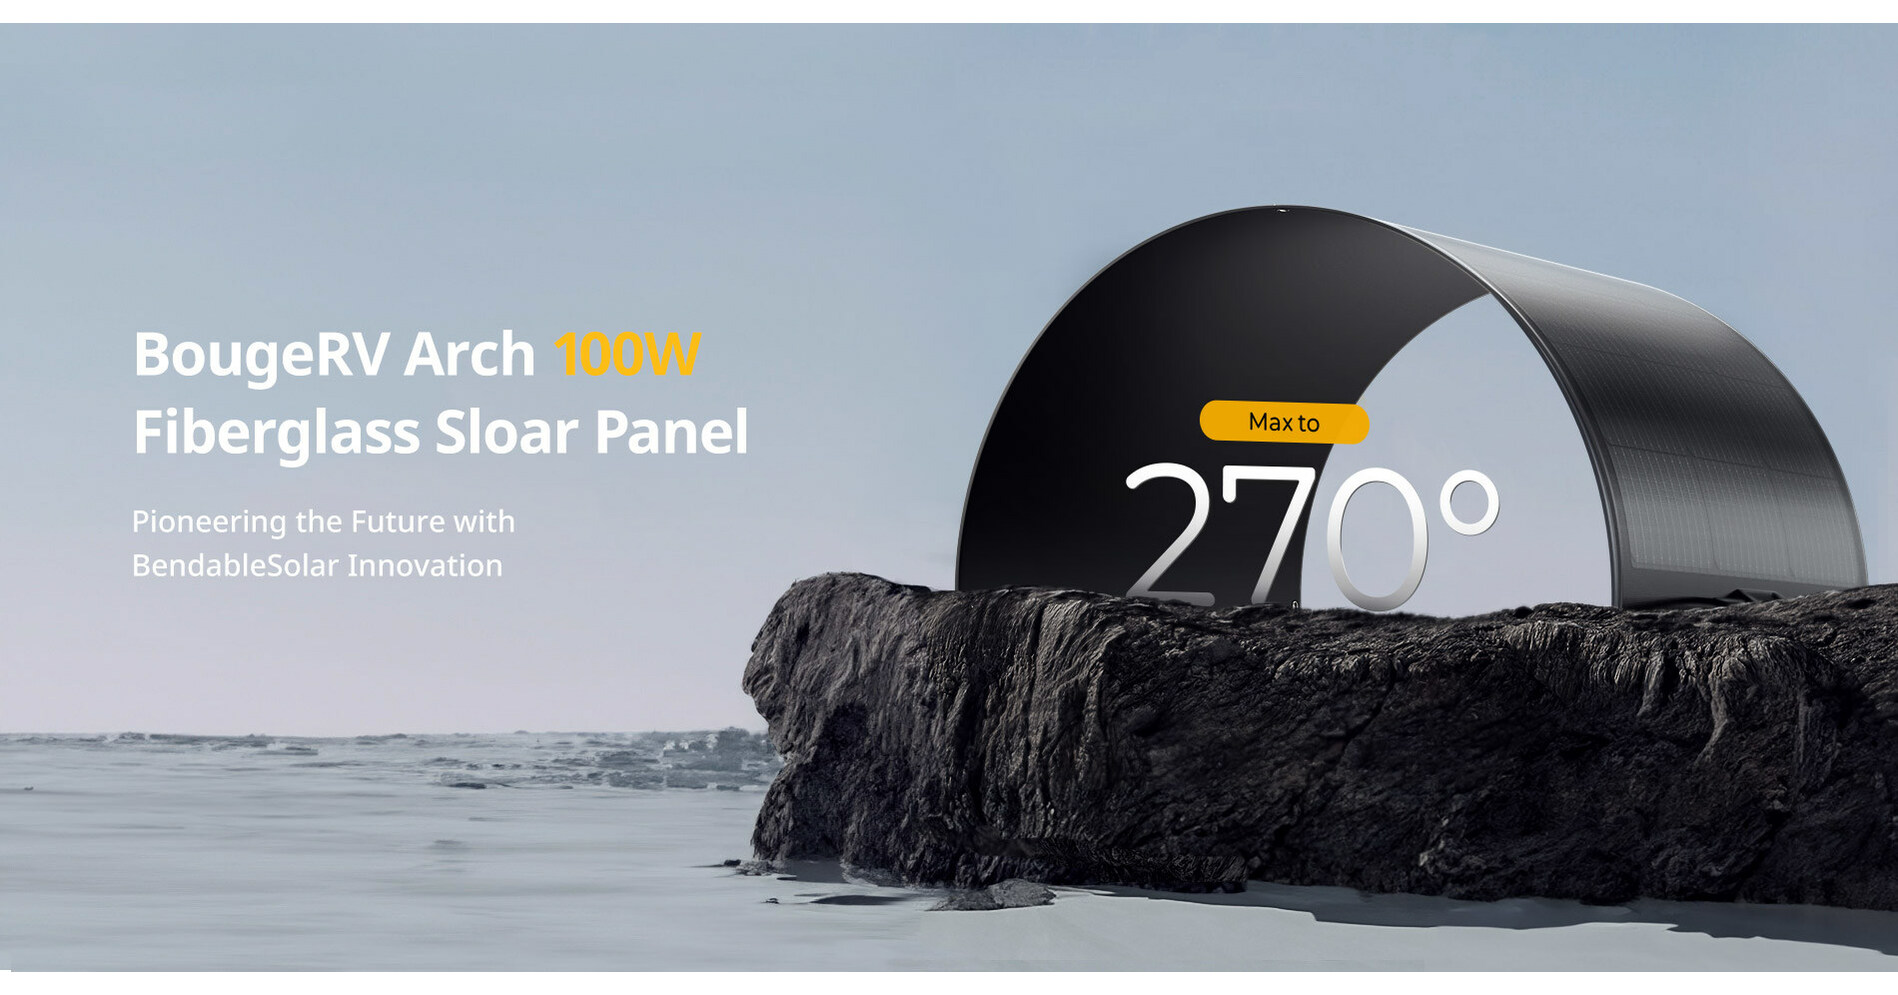 BougeRV Arch launches new Max 270° bendable fiberglass Solar Panel with  technological breakthrough